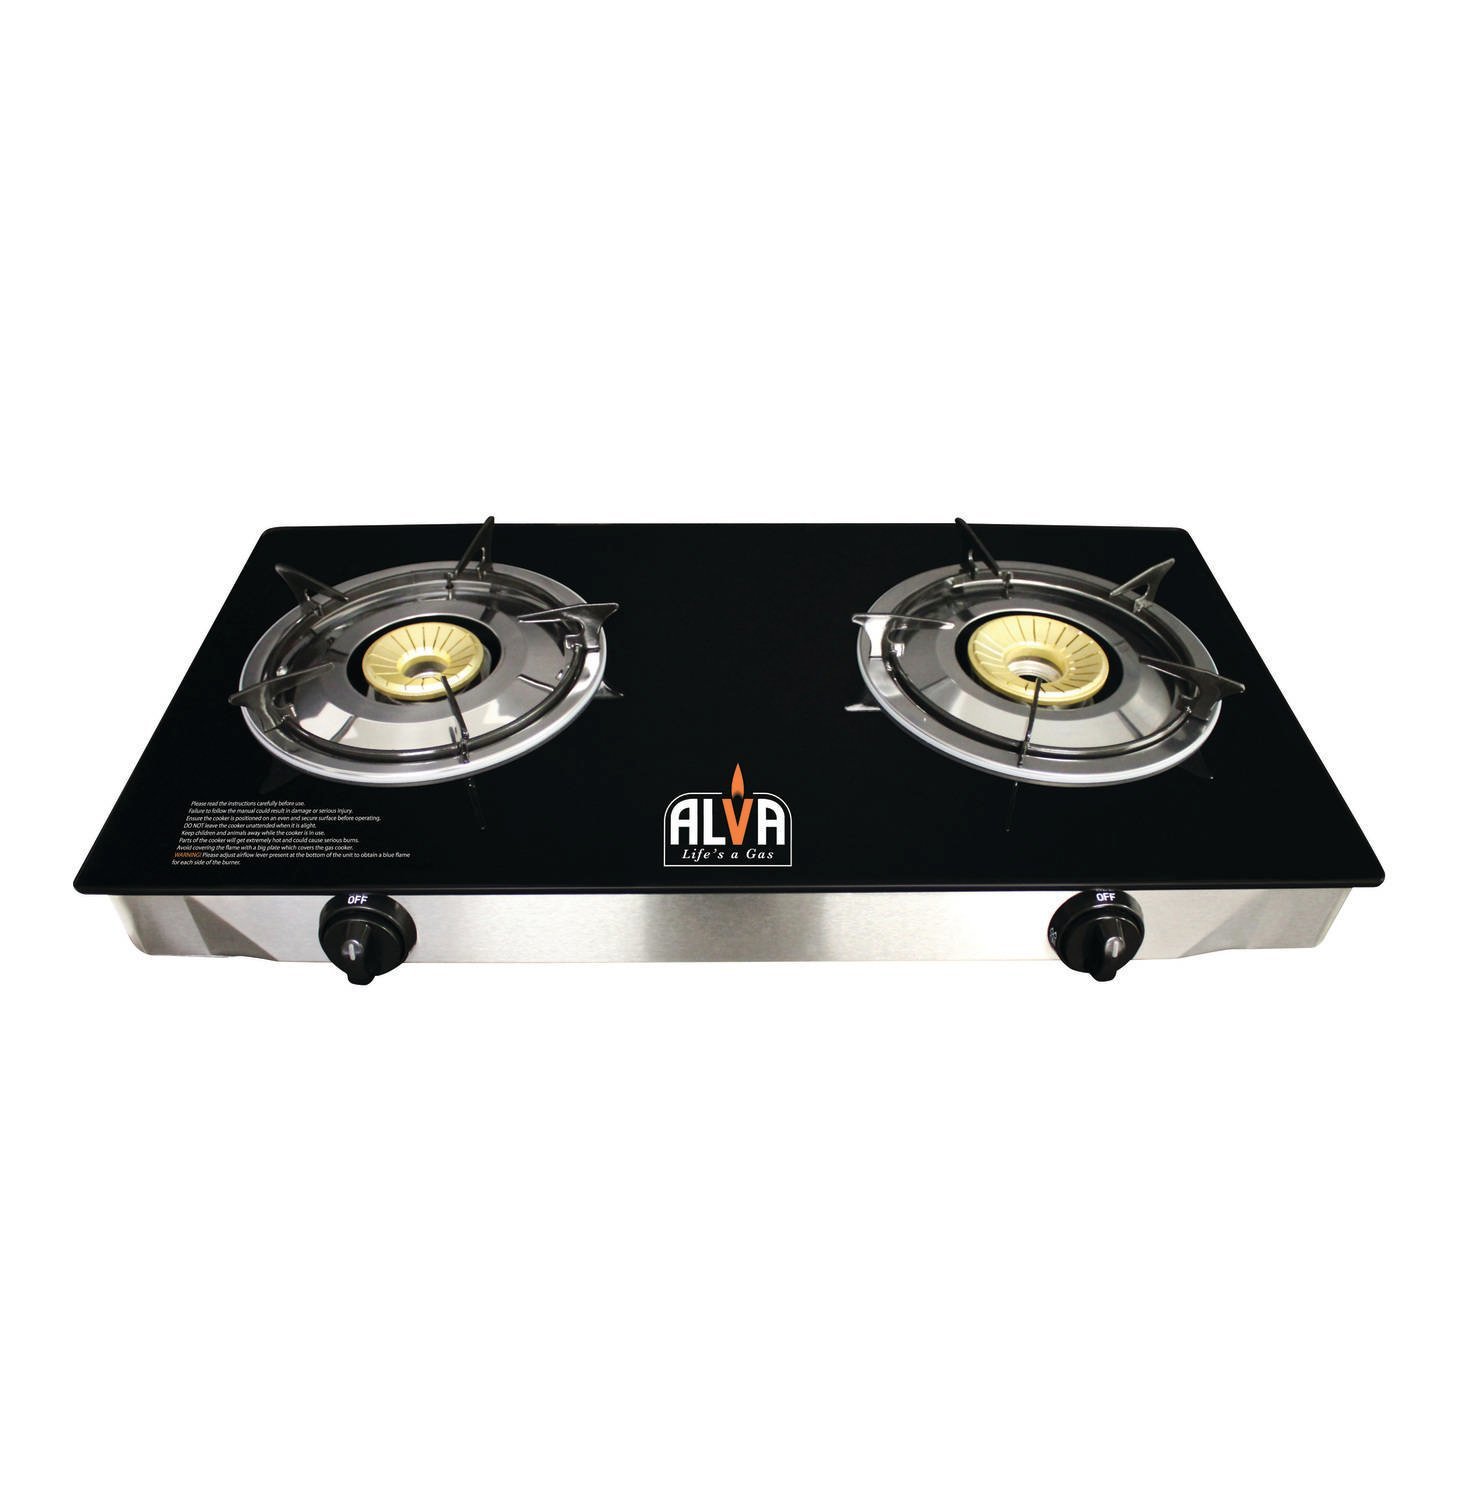 Glass Top Gas Stove - GLEN 4 Burner Glass Cooktop Gas Stove (GL 1041 GT AI) : un ... / Fitfabhome gas range protector reusable stove top burner liner cover nonstick cleaning 6pc.